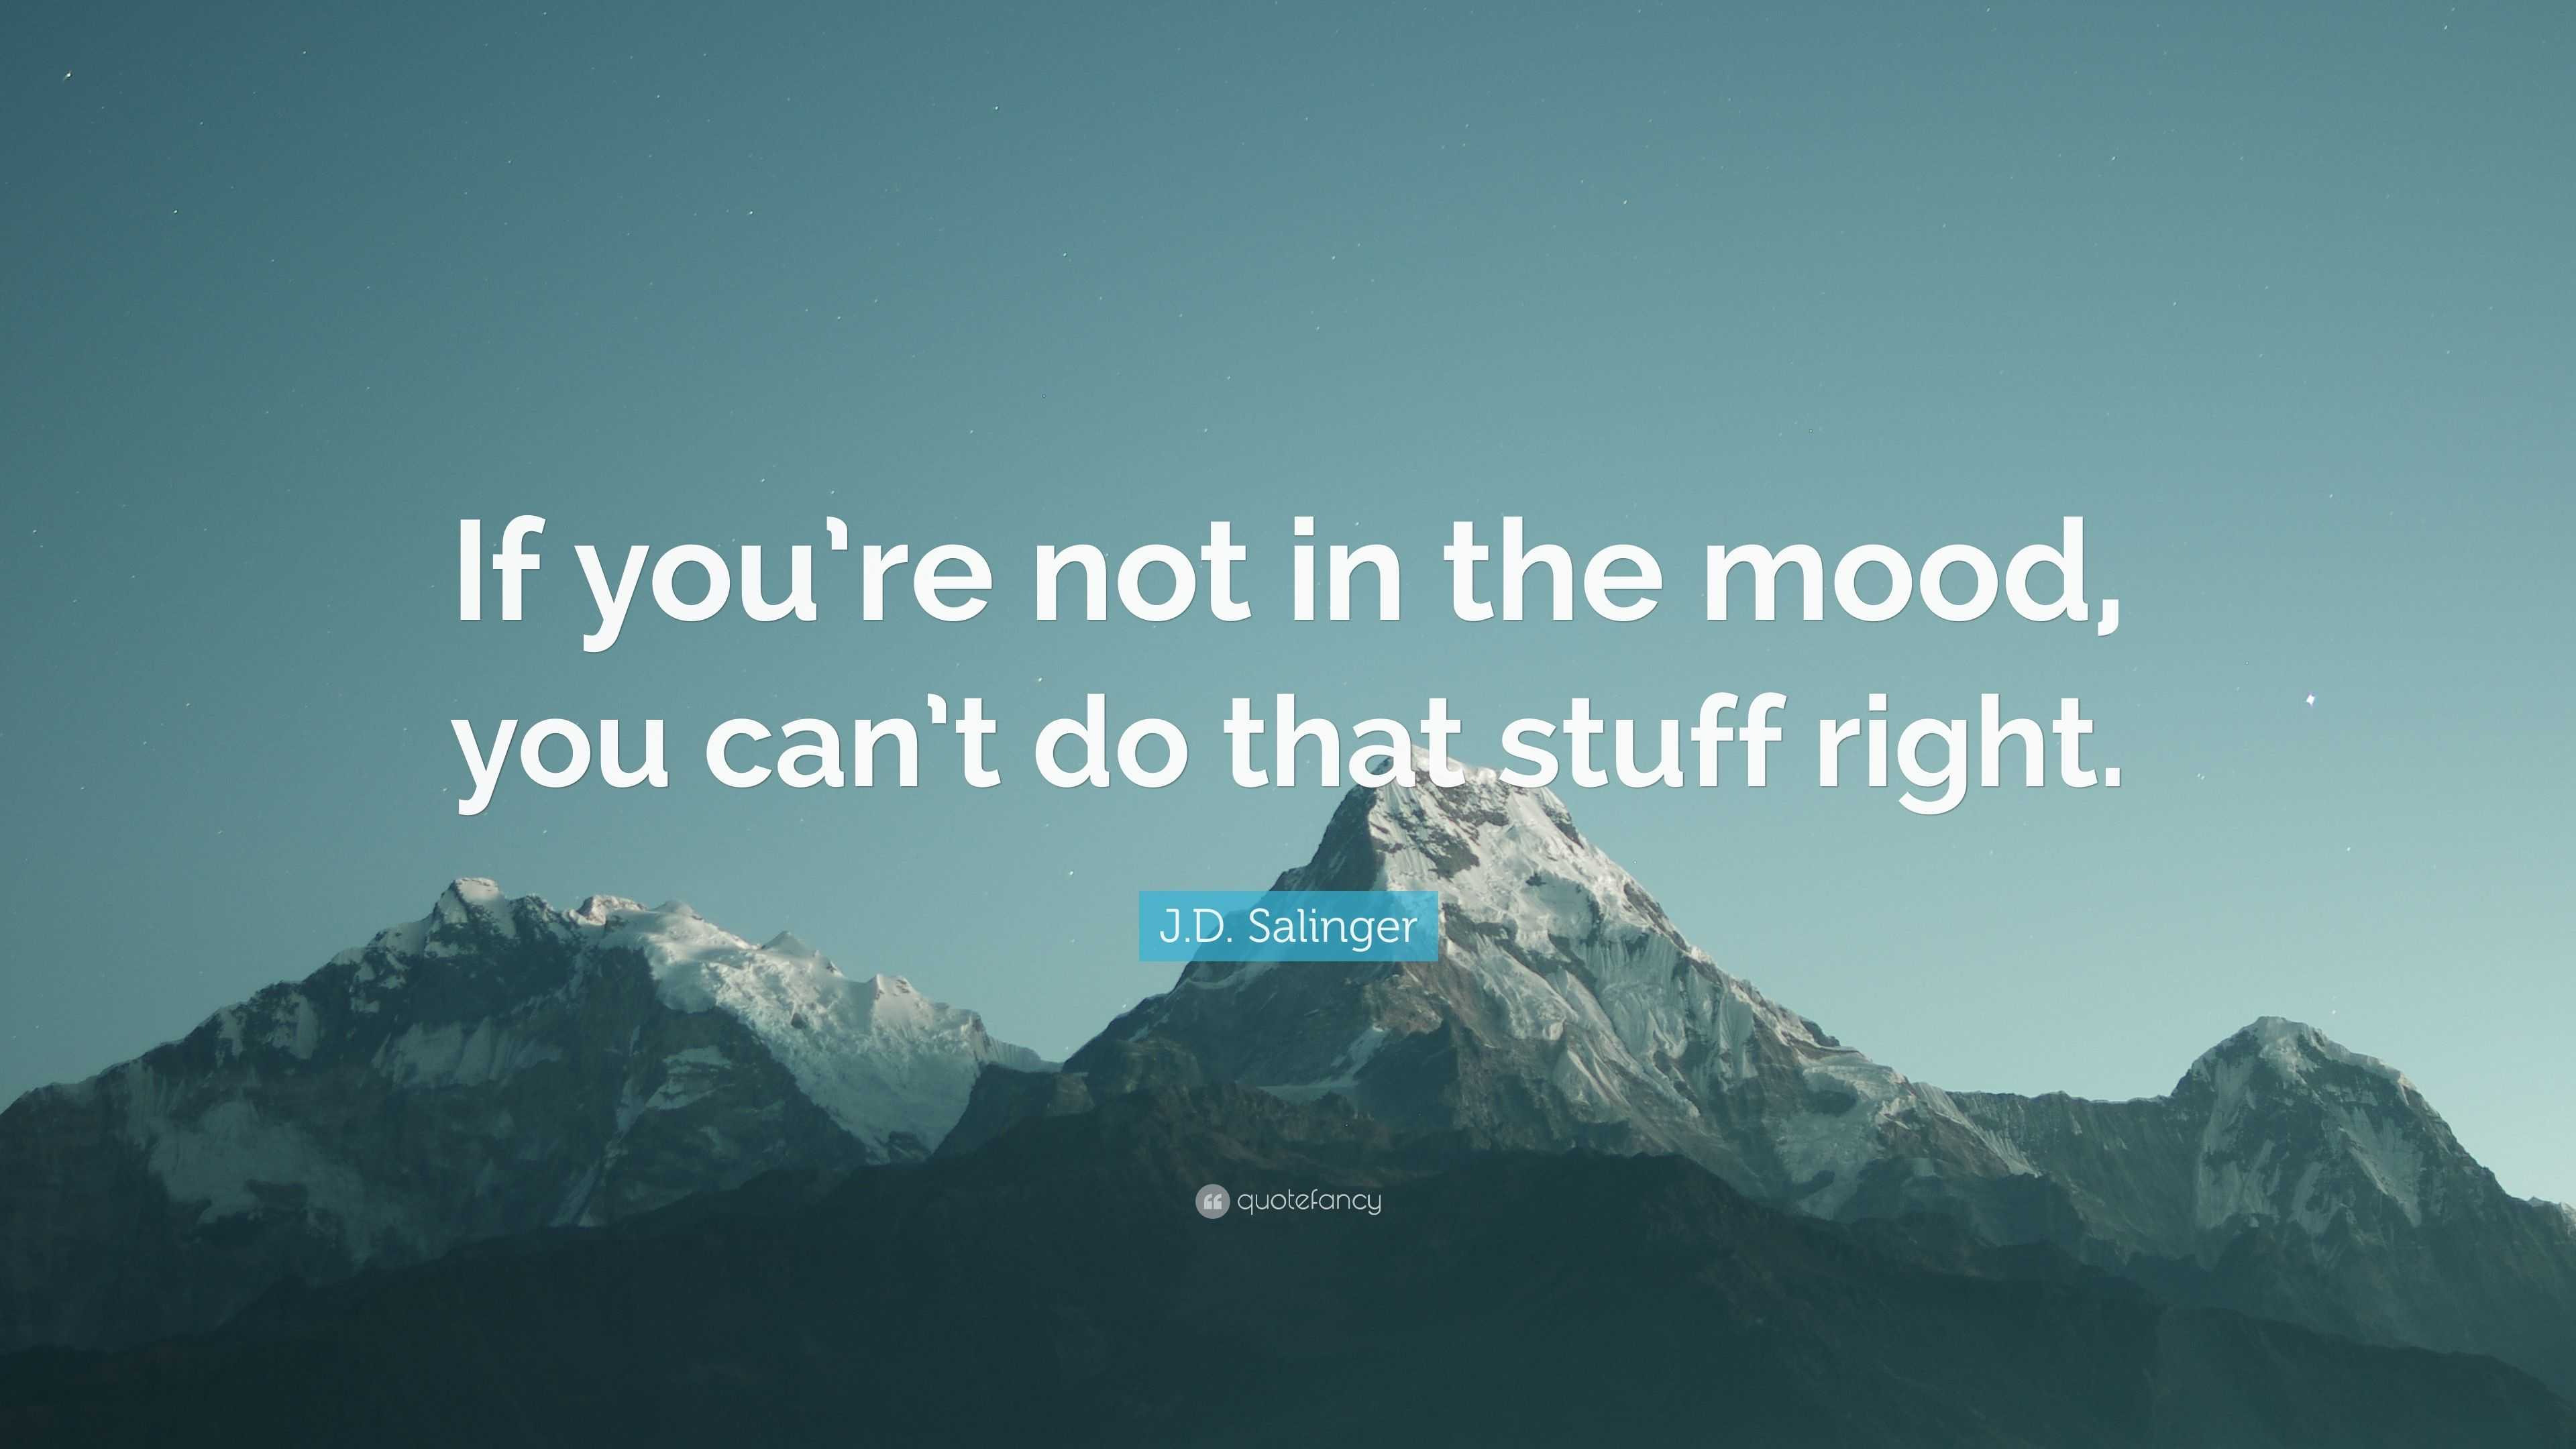 Jd Salinger Quote “if Youre Not In The Mood You Cant Do That Stuff Right” 